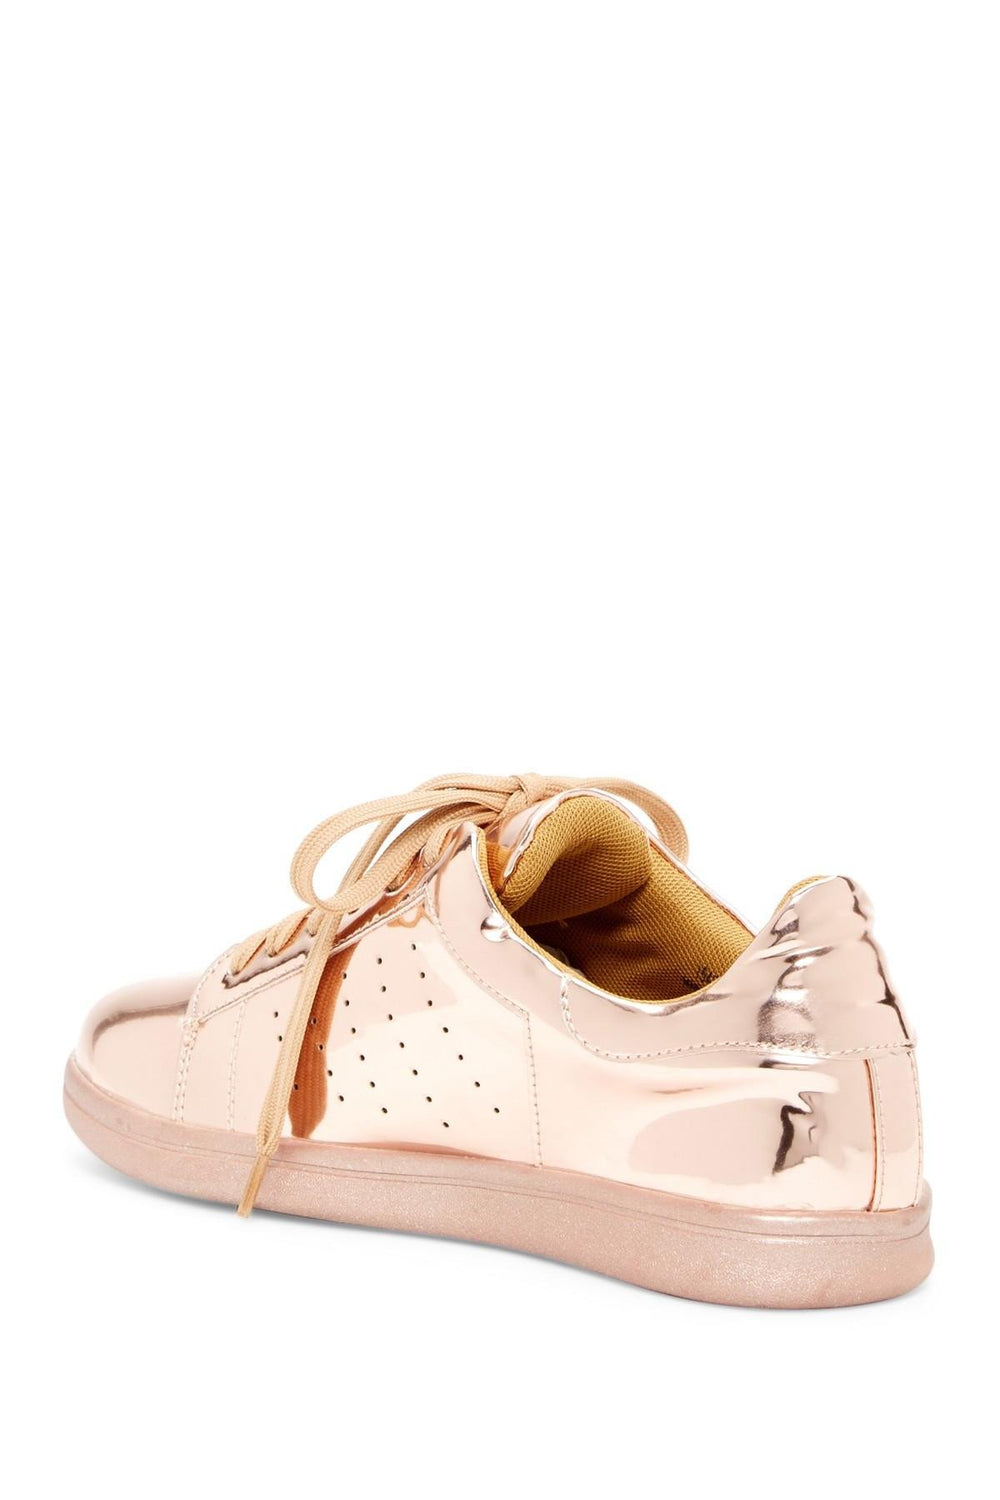 Women's Metallic Lace Up Trainers - Gold/Silver/Pewter Rose Gold